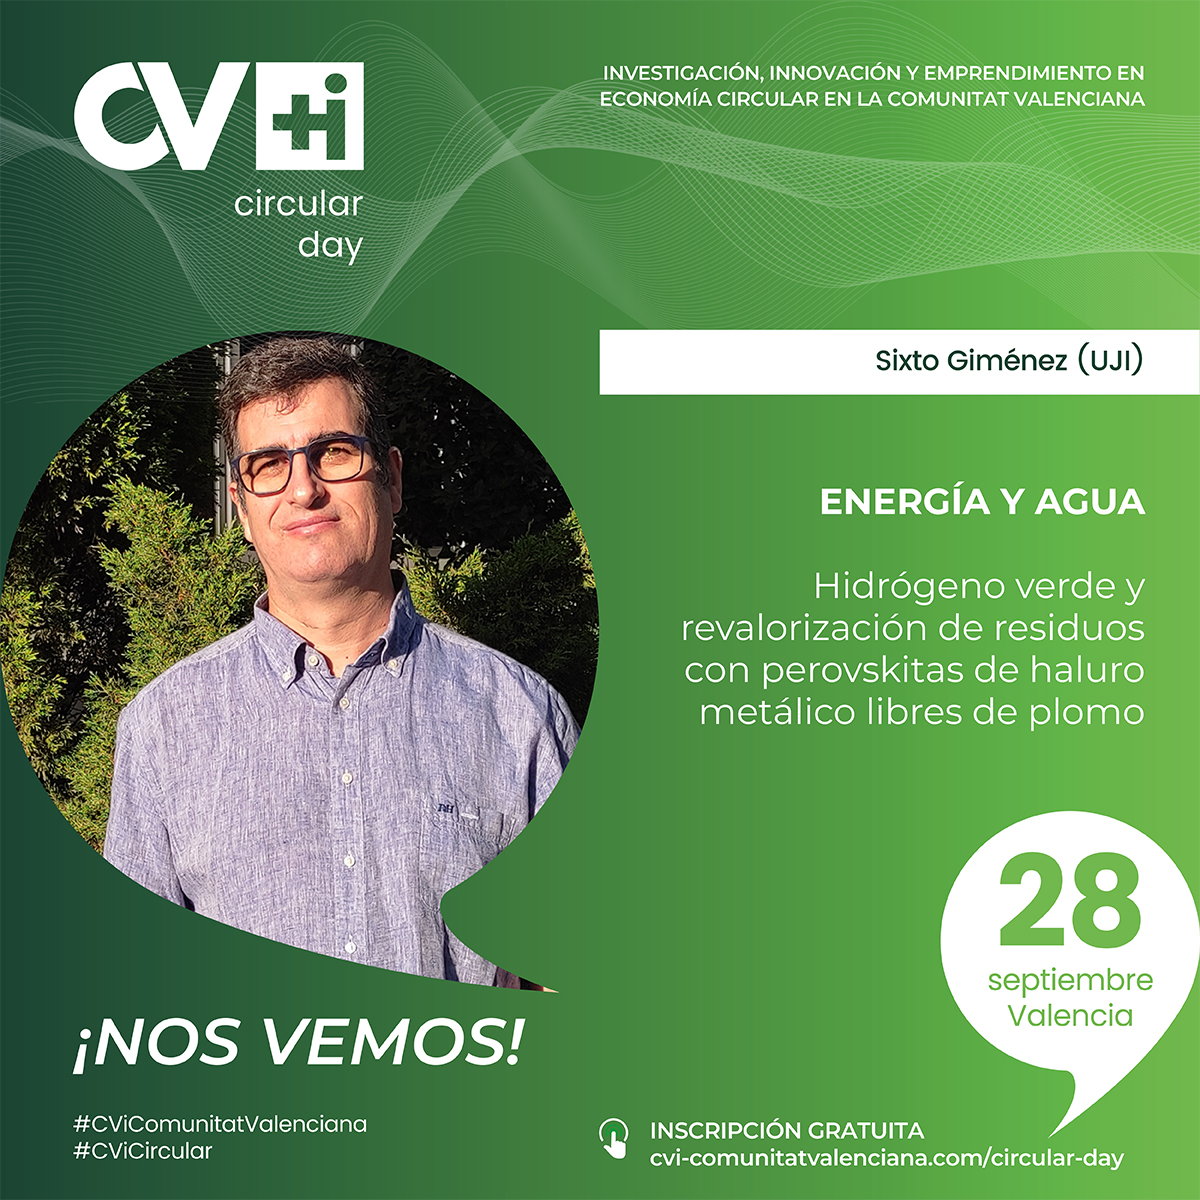 Join us tomorrow at the CV+i Circular Day in #Valencia, where our coordinator Sixto Gimenez from @UJIuniversitat will be presenting #OHPERA, and discover the key players that are driving Valencia's economic and social development forward! 👉 rb.gy/3qv1v